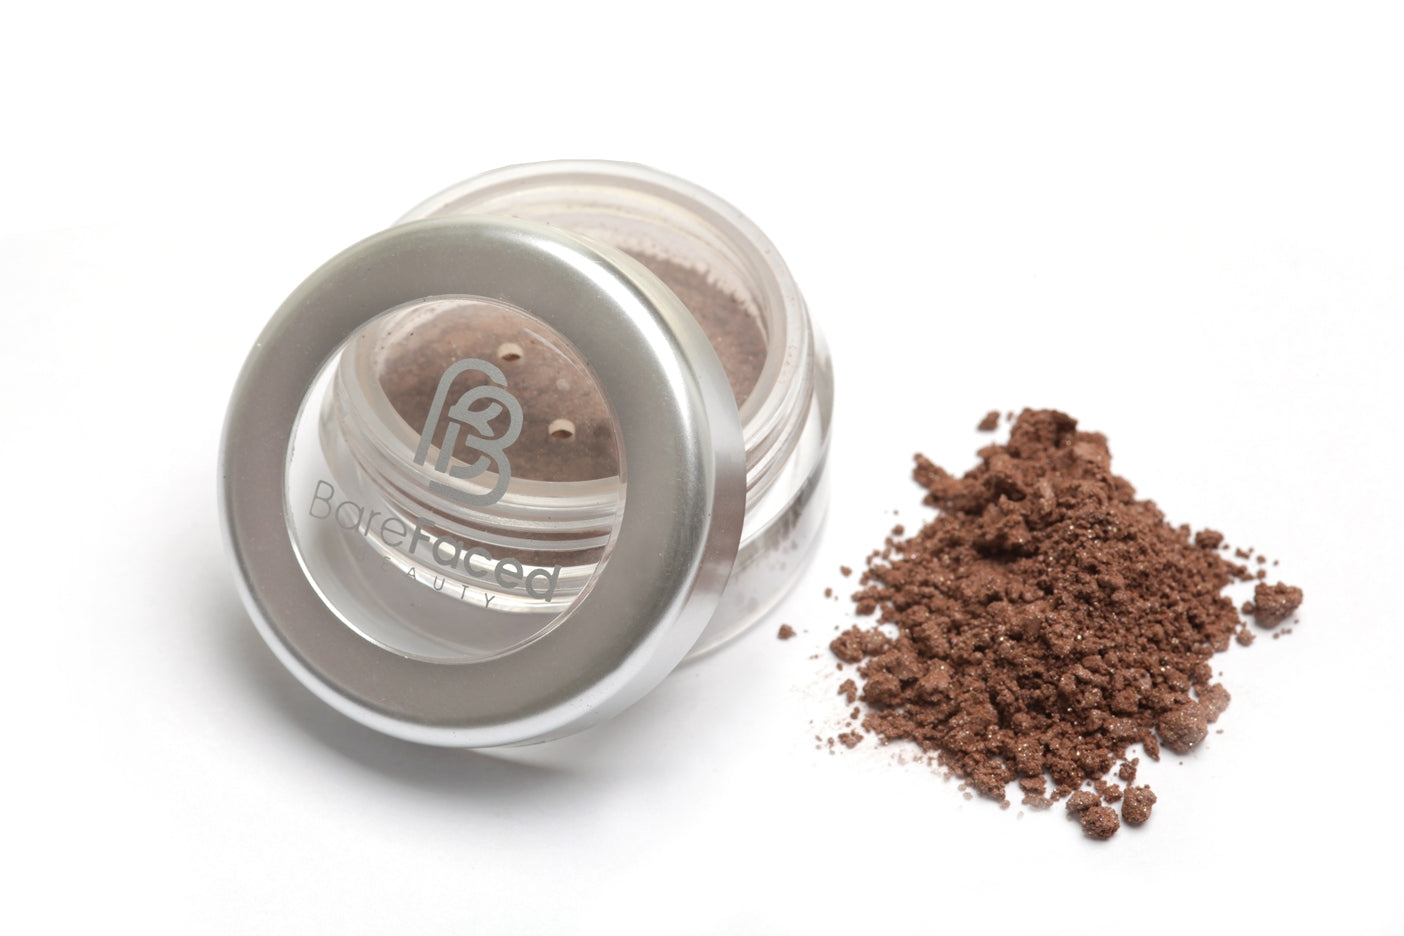 A small round pot of mineral eyeshadow, with a swatch of the powder next to it showing a semi-matt medium brown shade